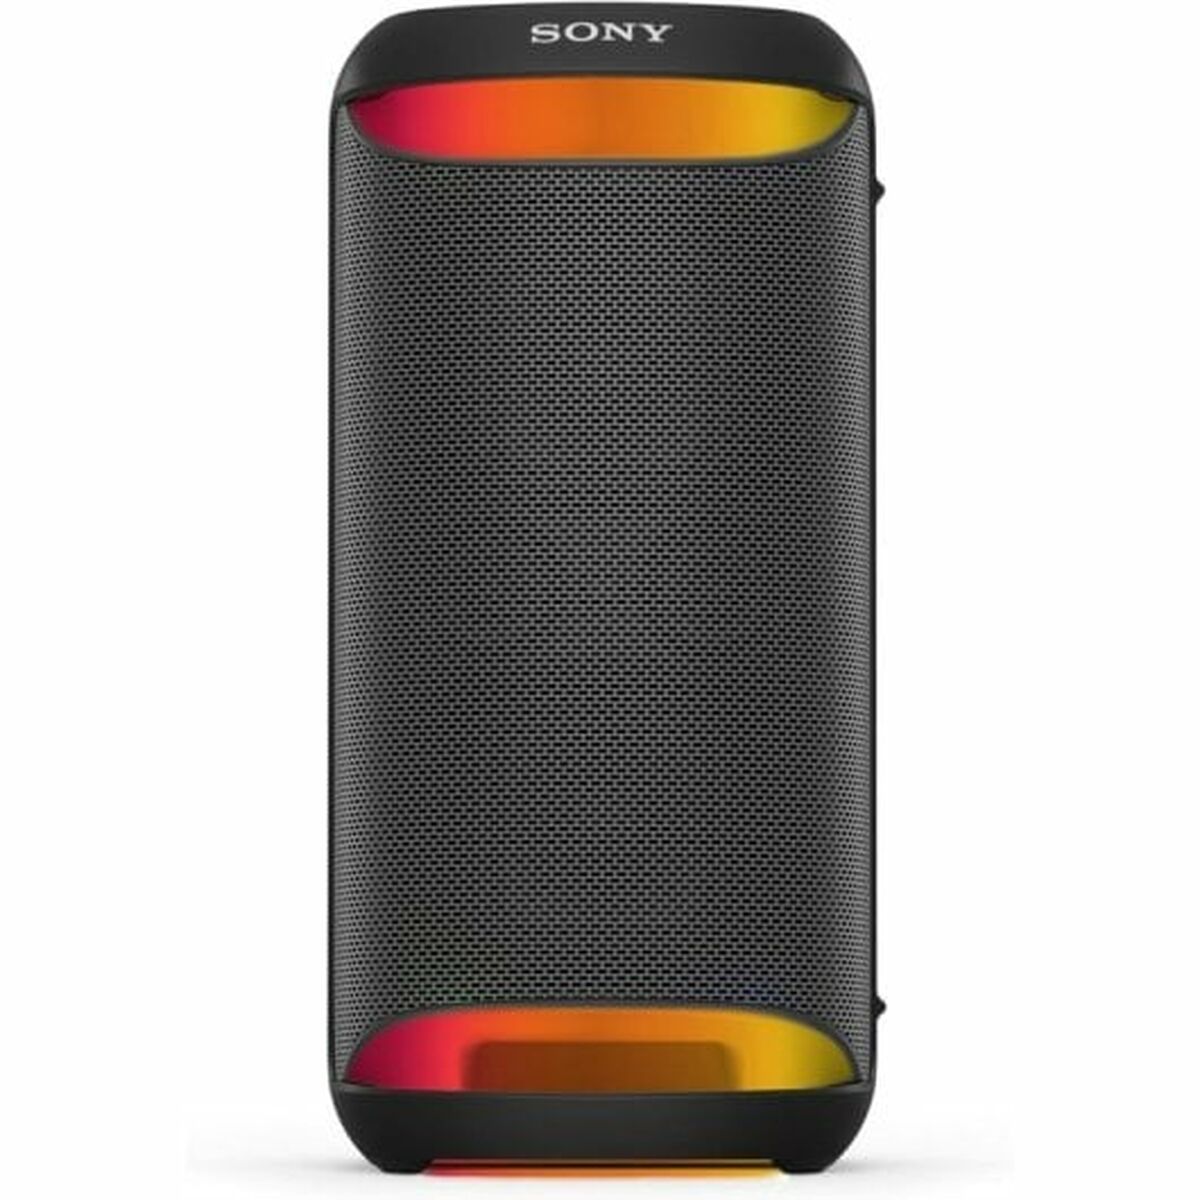 Portable Bluetooth Speakers Sony XP700  Black, Sony, Electronics, Mobile communication and accessories, portable-bluetooth-speakers-sony-xp700-black, Brand_Sony, category-reference-2609, category-reference-2882, category-reference-2923, category-reference-t-19653, category-reference-t-21311, category-reference-t-25527, category-reference-t-4036, category-reference-t-4037, Condition_NEW, entertainment, music, Price_400 - 500, telephones & tablets, wifi y bluetooth, RiotNook